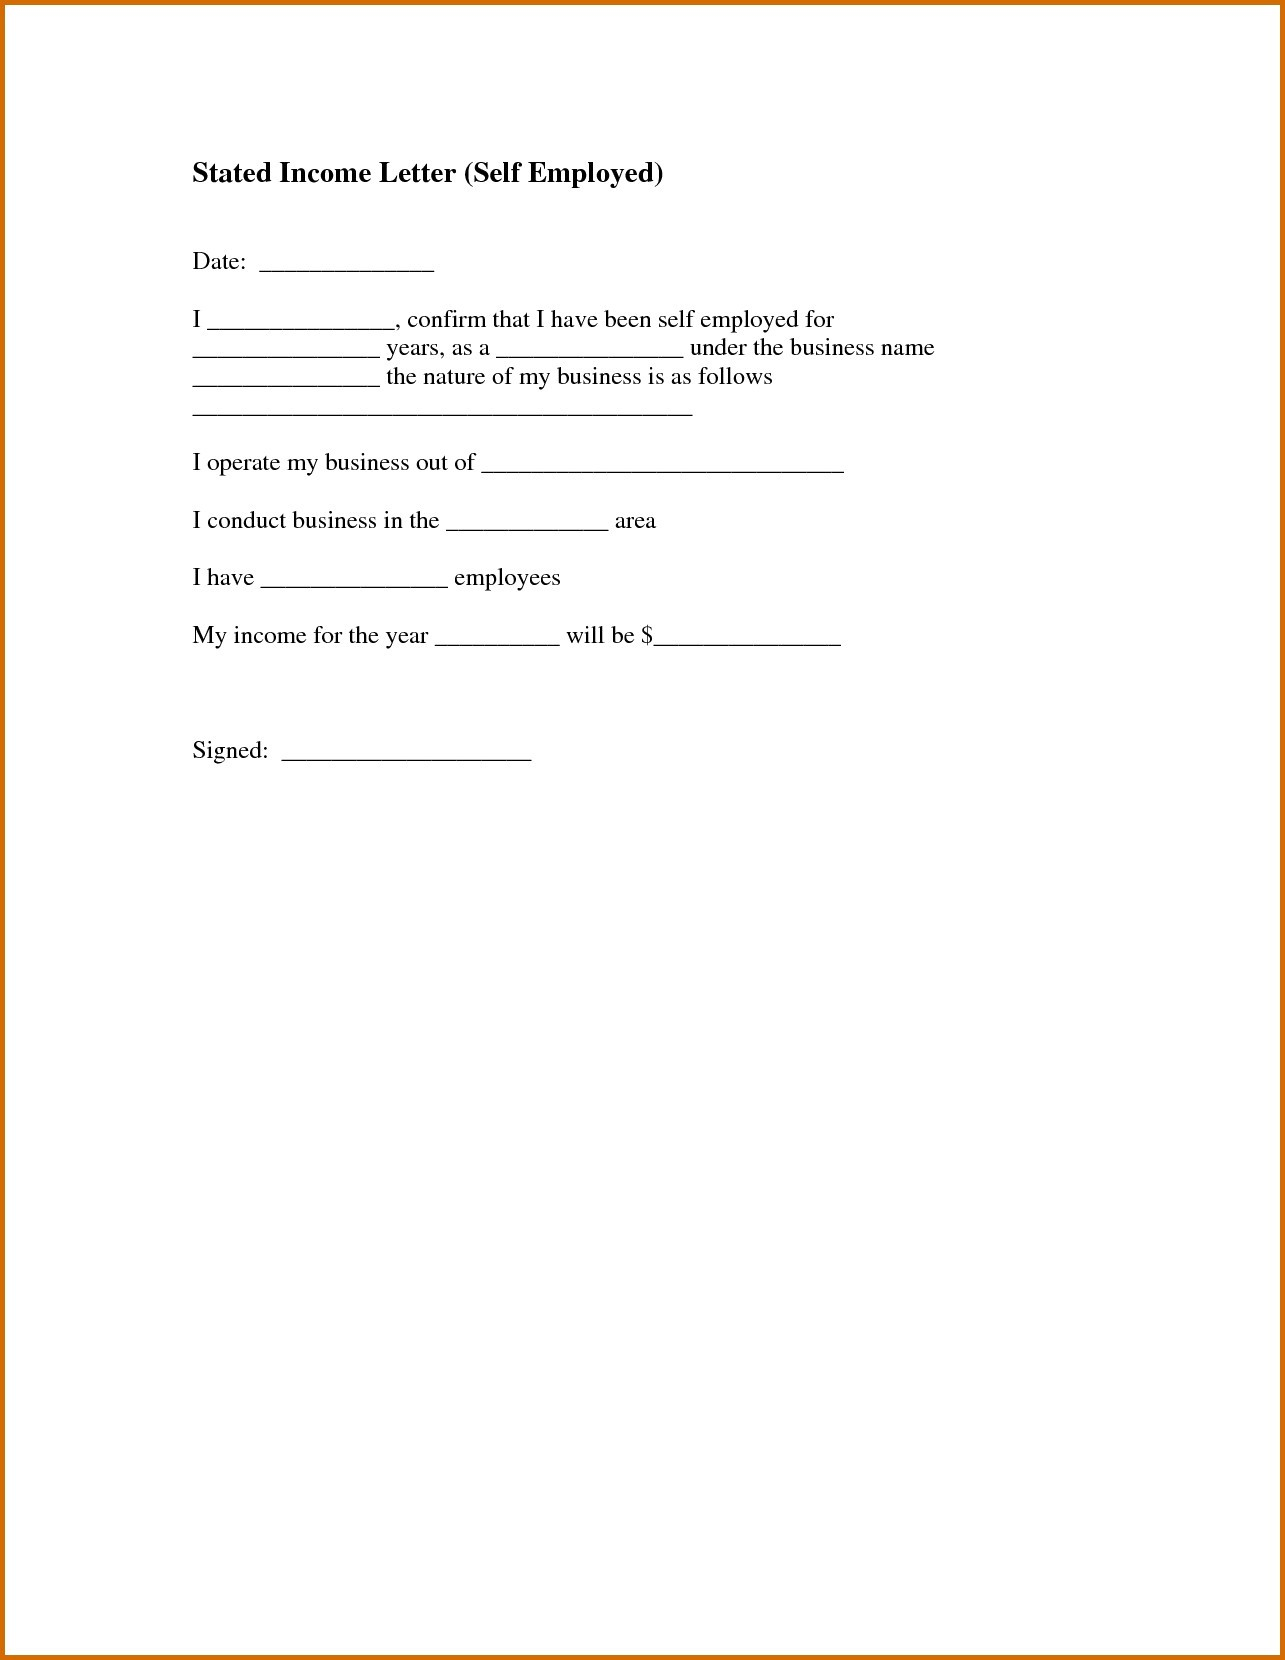 proof-of-no-income-letter-template-samples-letter-template-collection